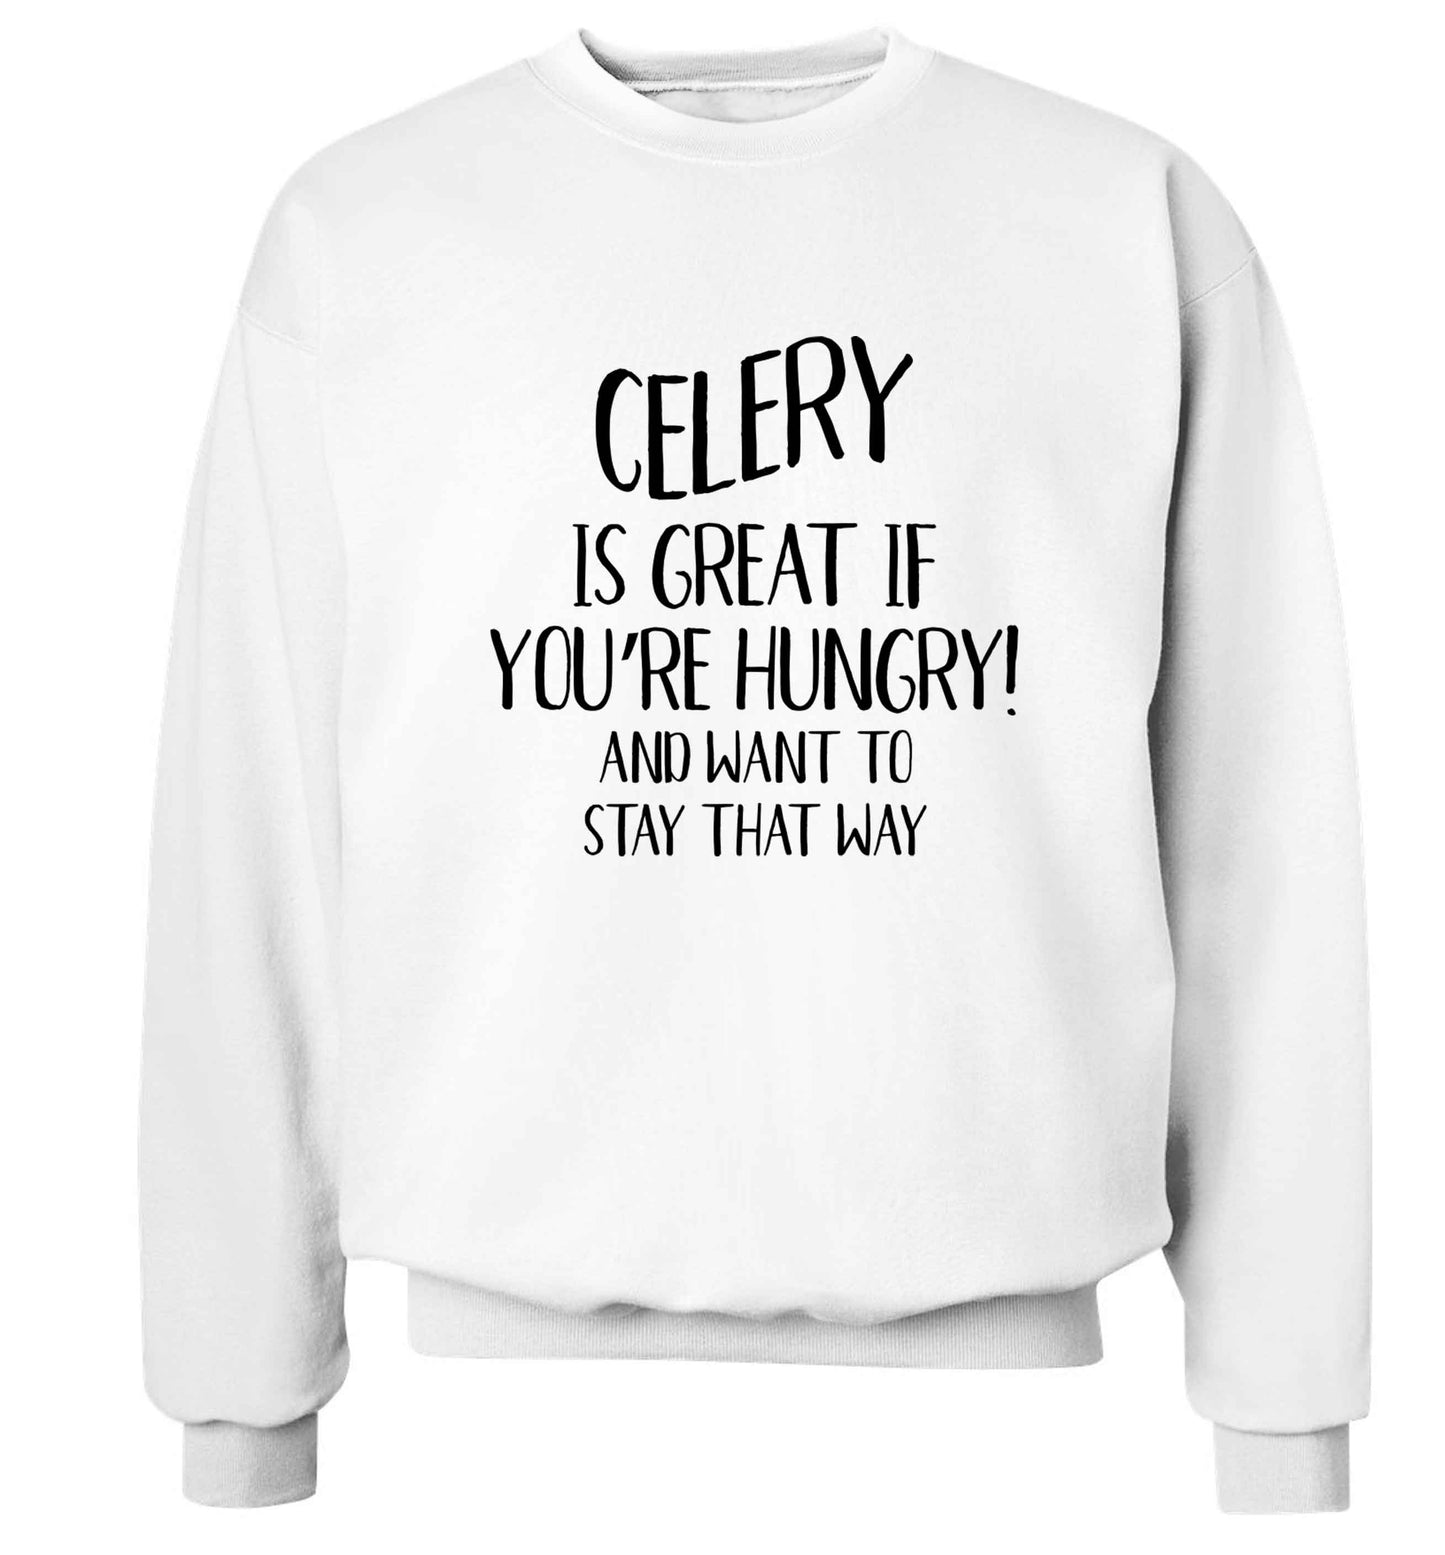 Cellery is great when you're hungry and want to stay that way Adult's unisex white Sweater 2XL